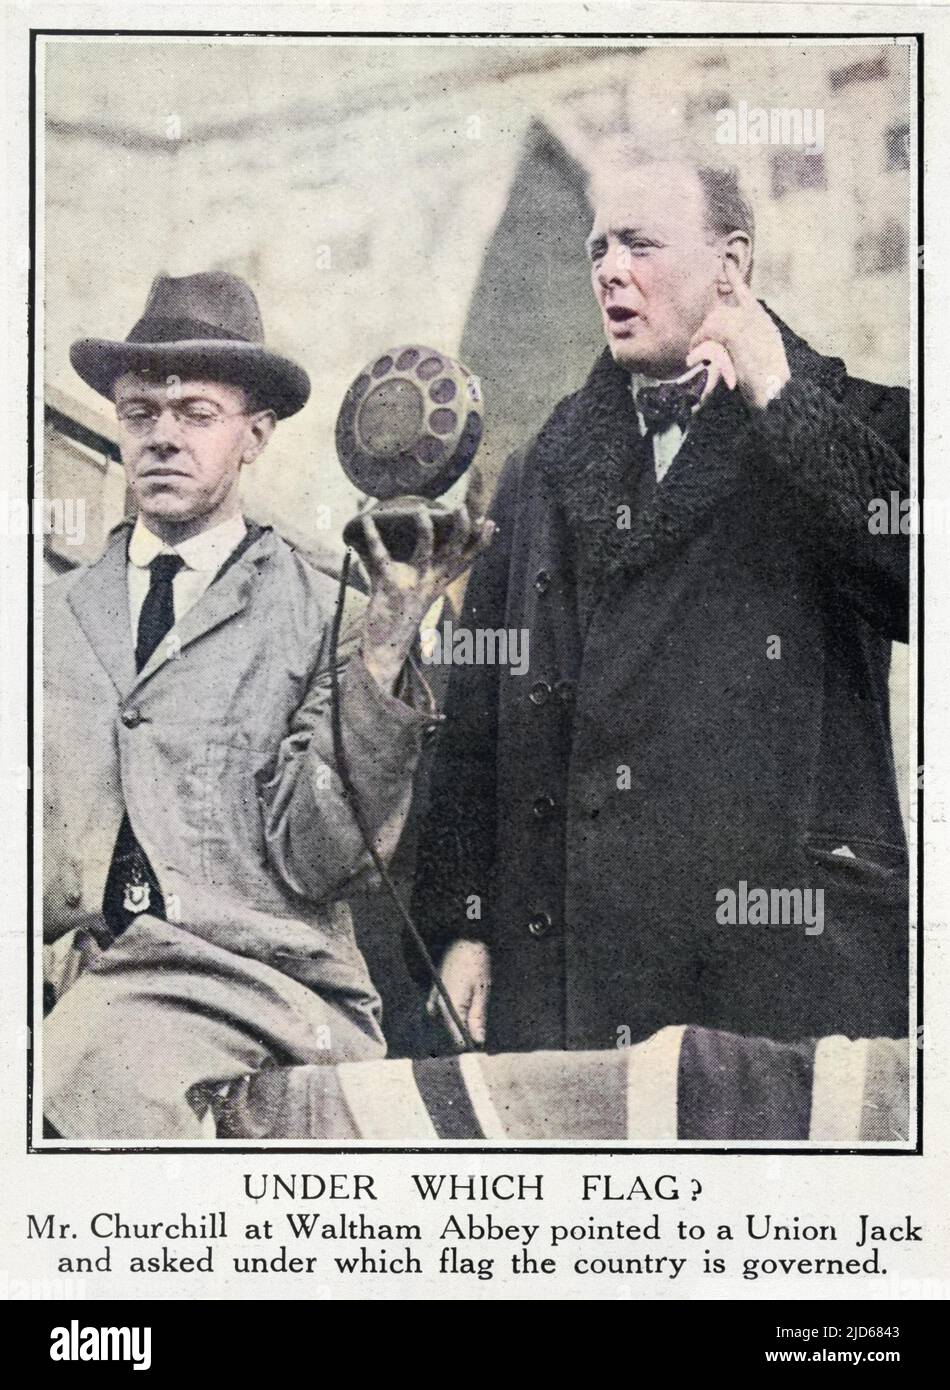 WINSTON CHURCHILL Electioneering at Waltham Abbey in 1924 Colourised version of : 10059302       Date: 1924 Stock Photo